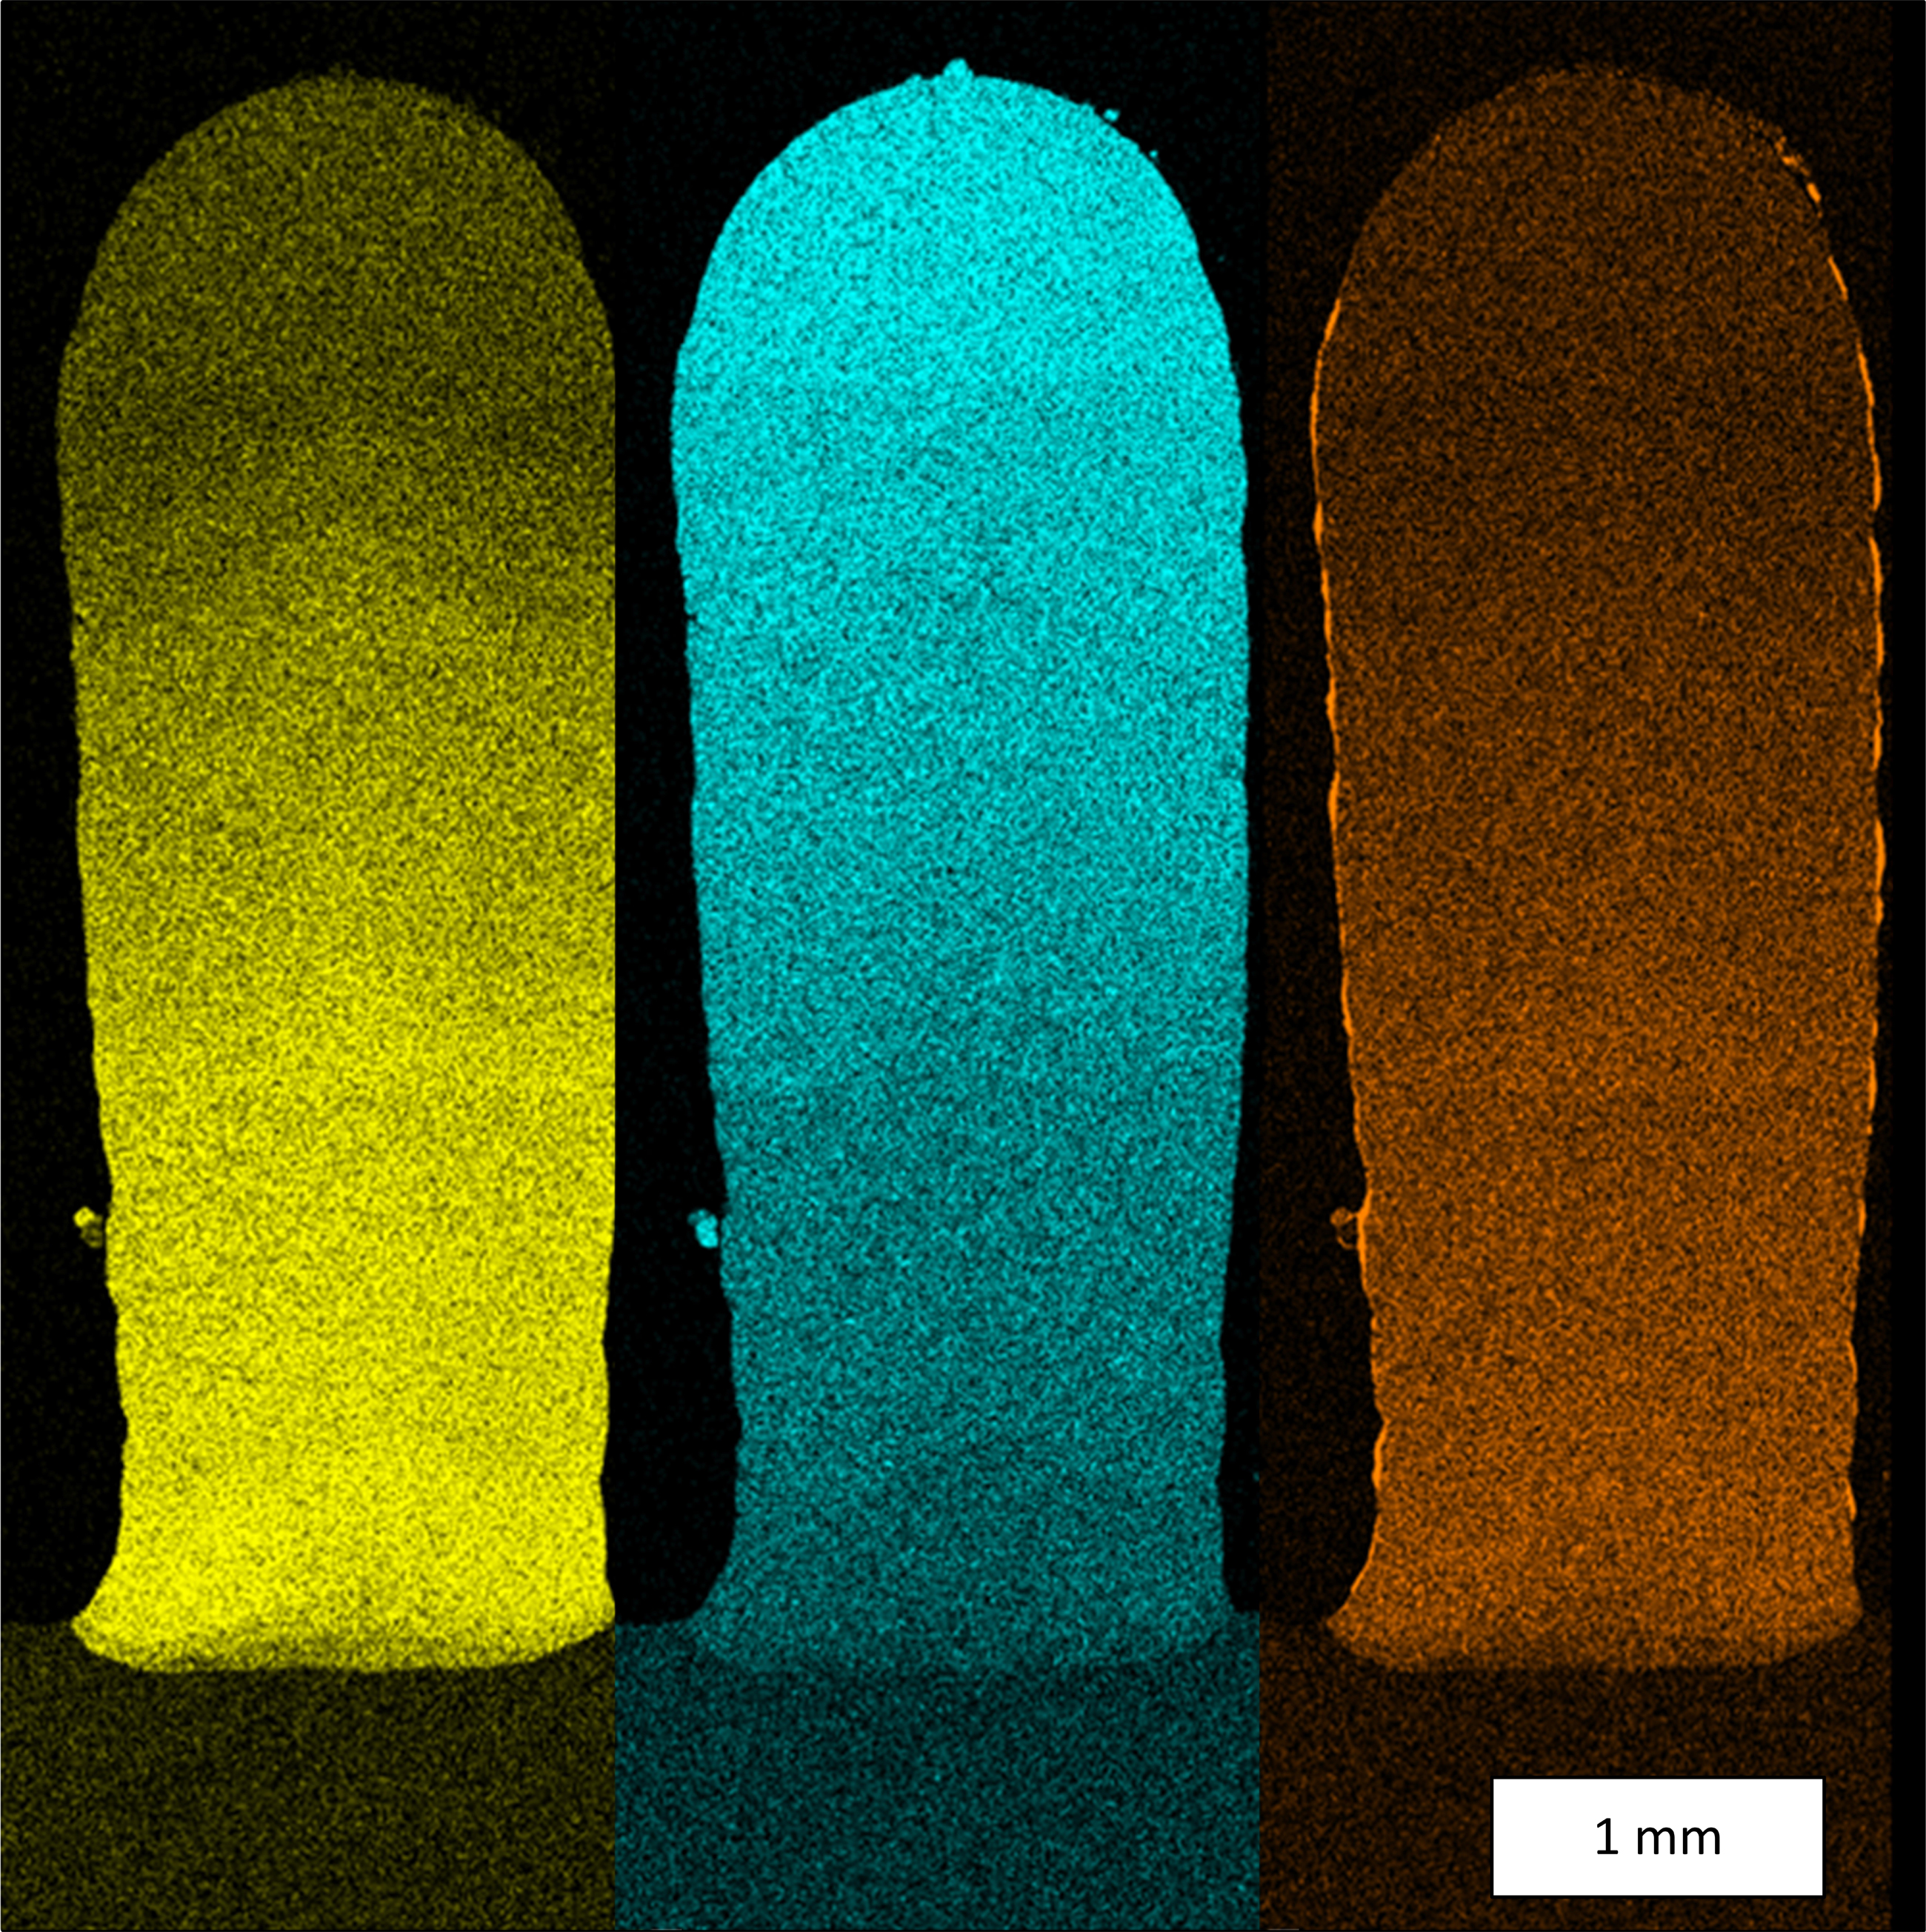 EDX-Mapping: The chemical analysis of a test geometry proves the material transition. The colors illustrate the continuous transition from the cobalt-based alloy Merl 72 to the nickel-based superalloy IN 718 (yellow: cobalt, blue: nickel, orange: aluminum).